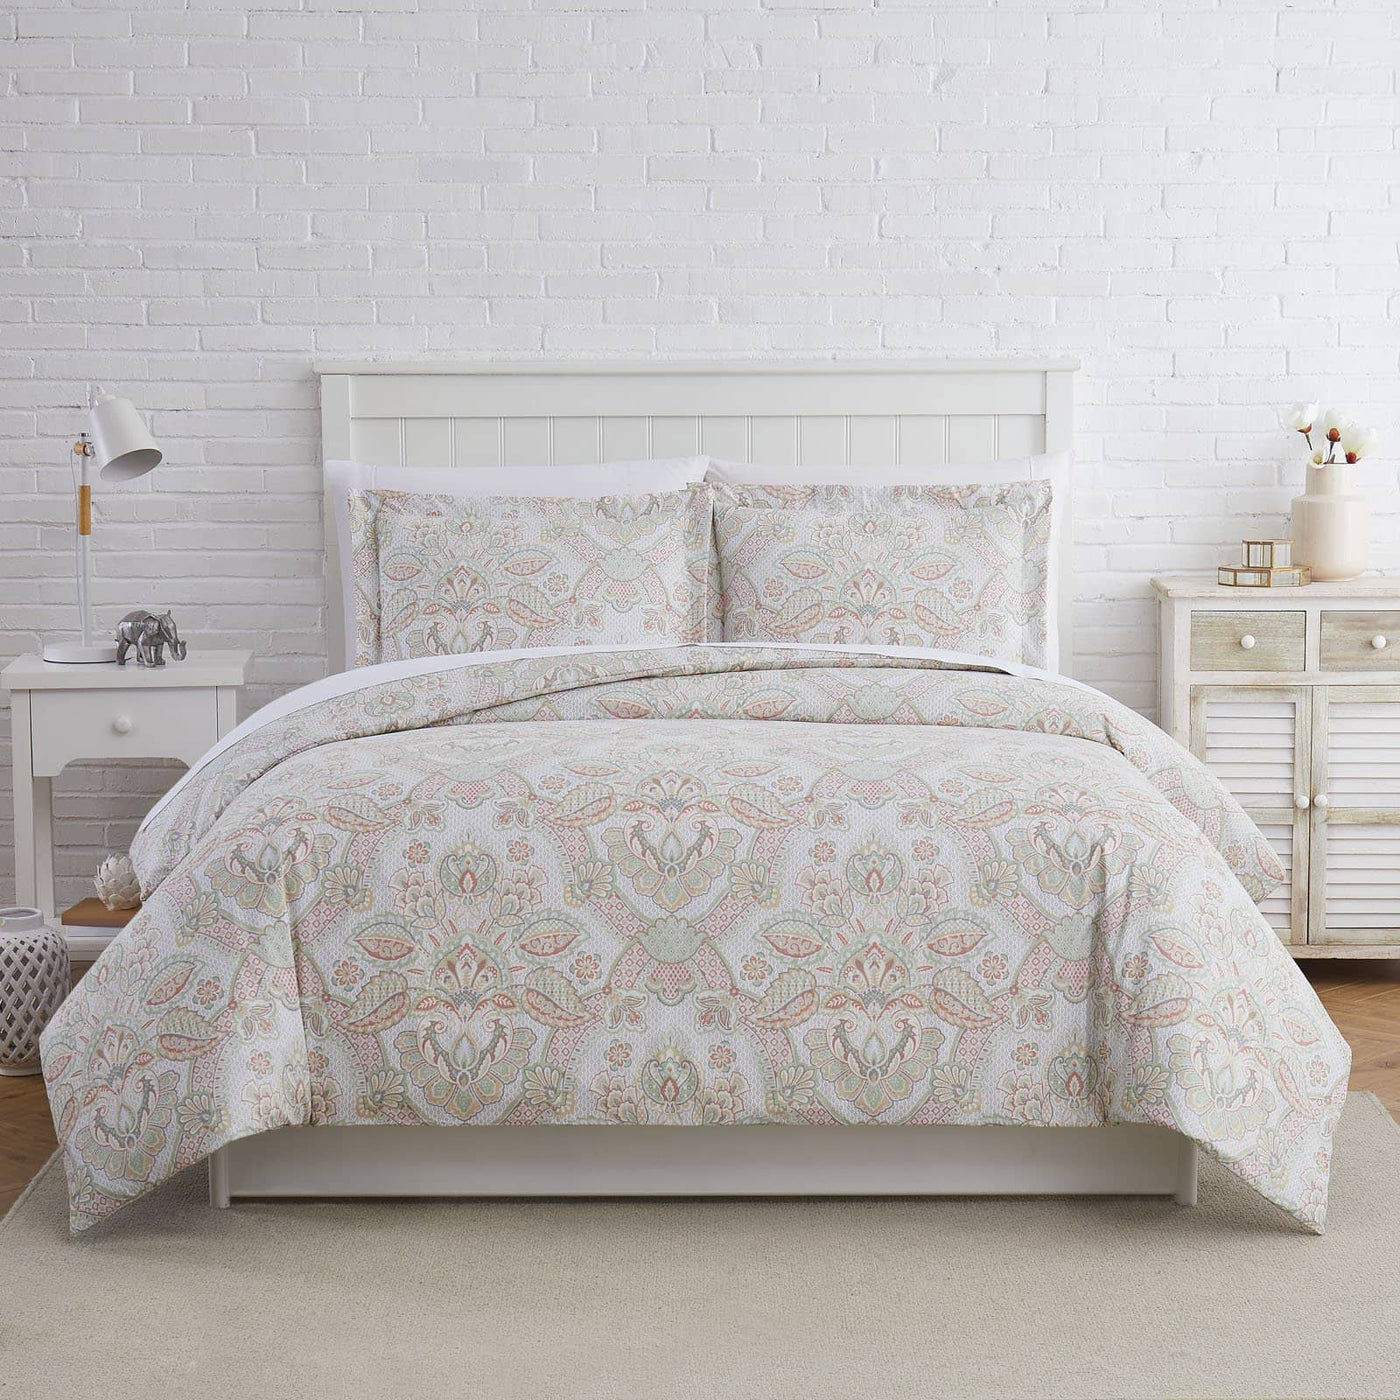 Enchantment Duvet Cover in Coral#color_enchantment-coral